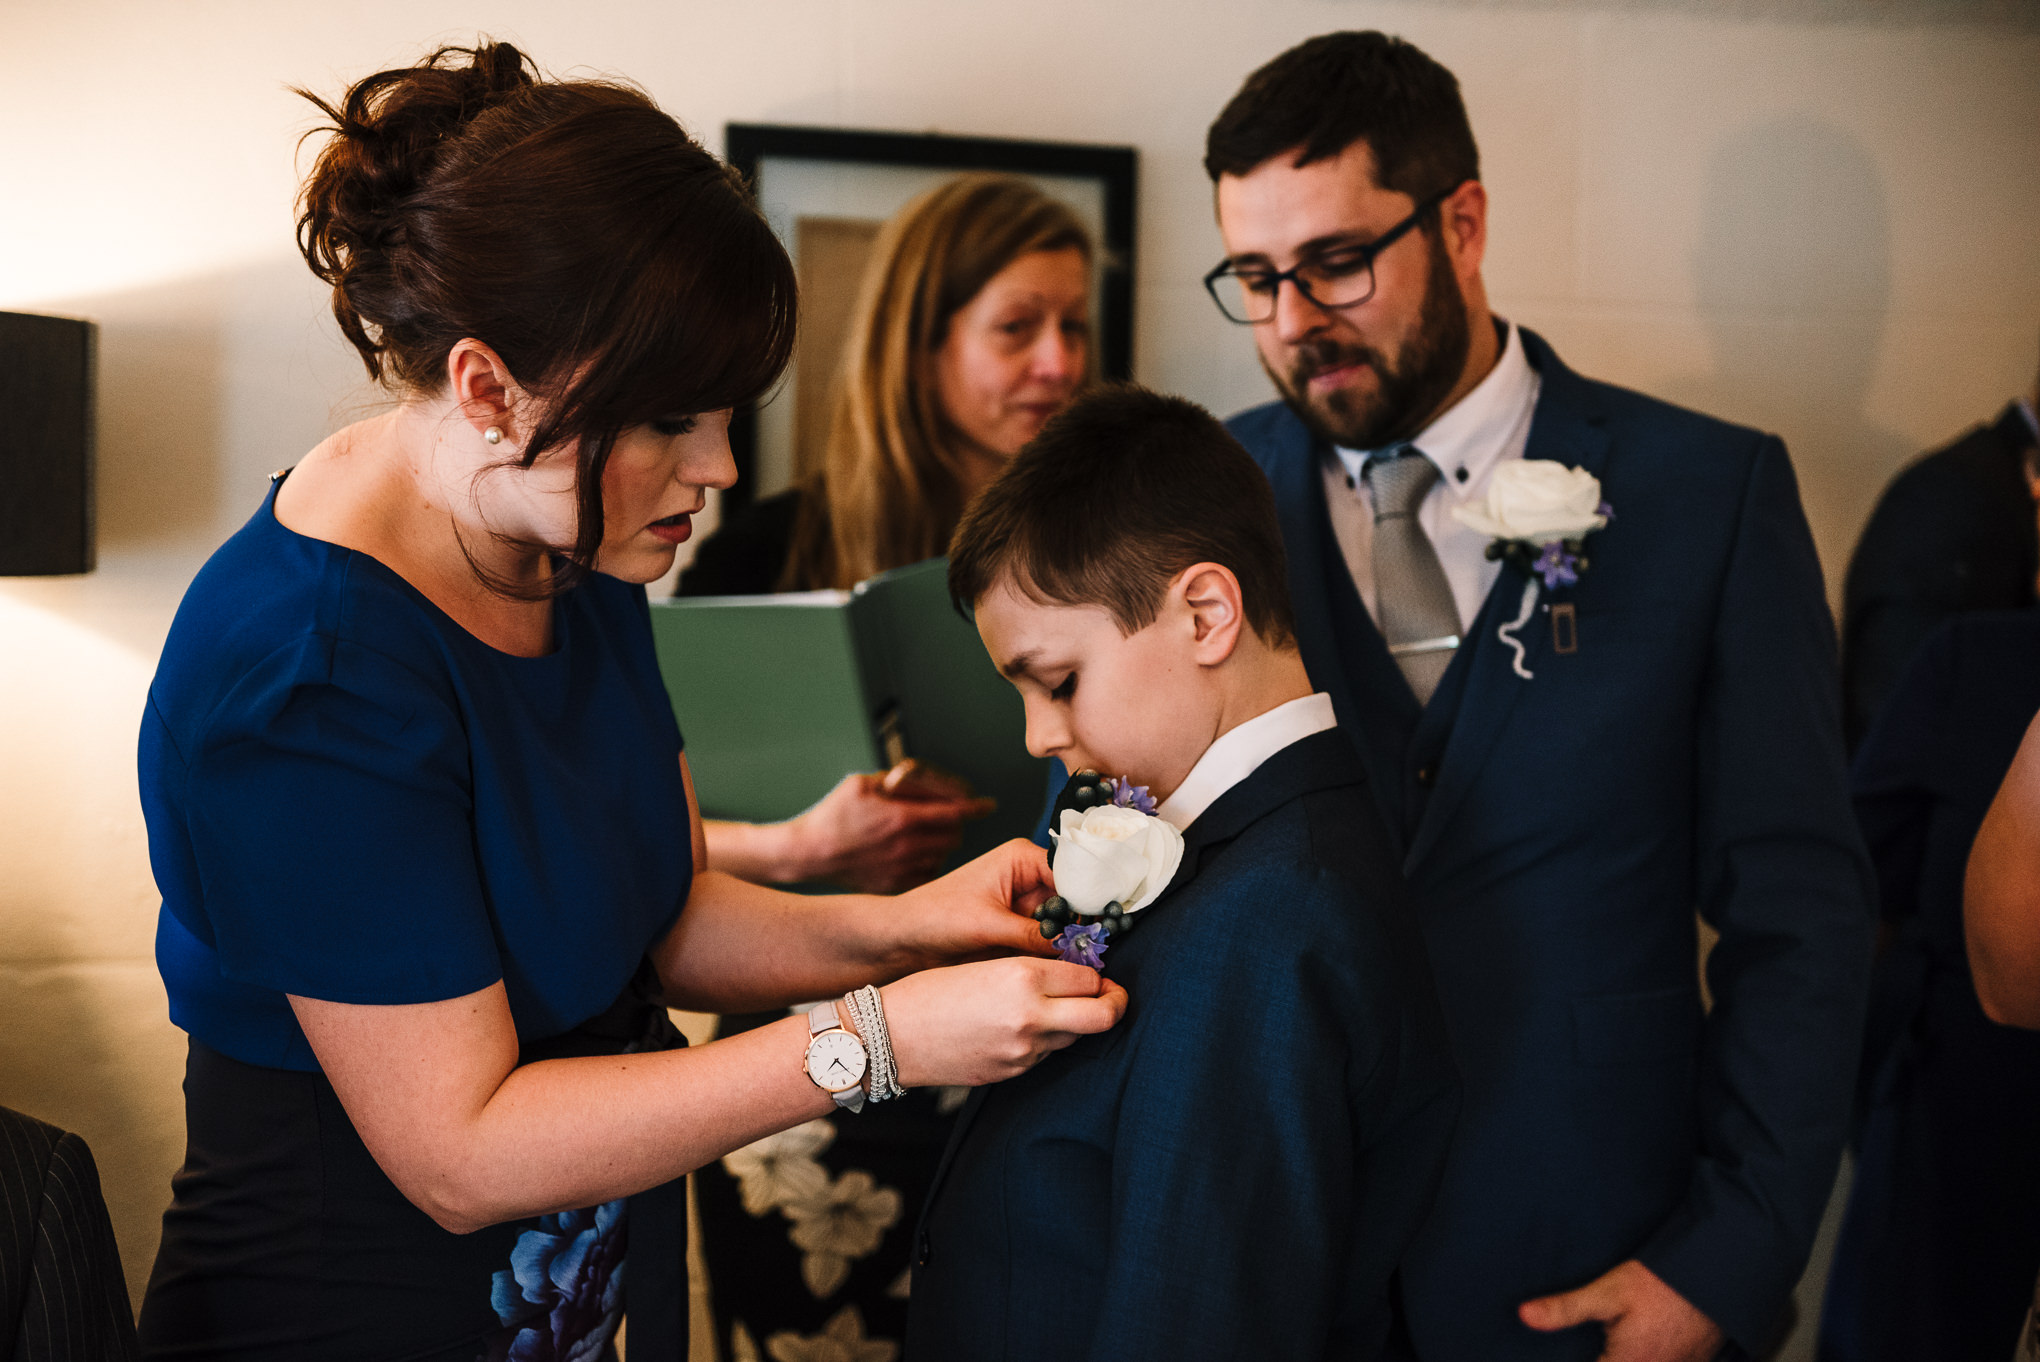 Pageboy having his button hole put on.